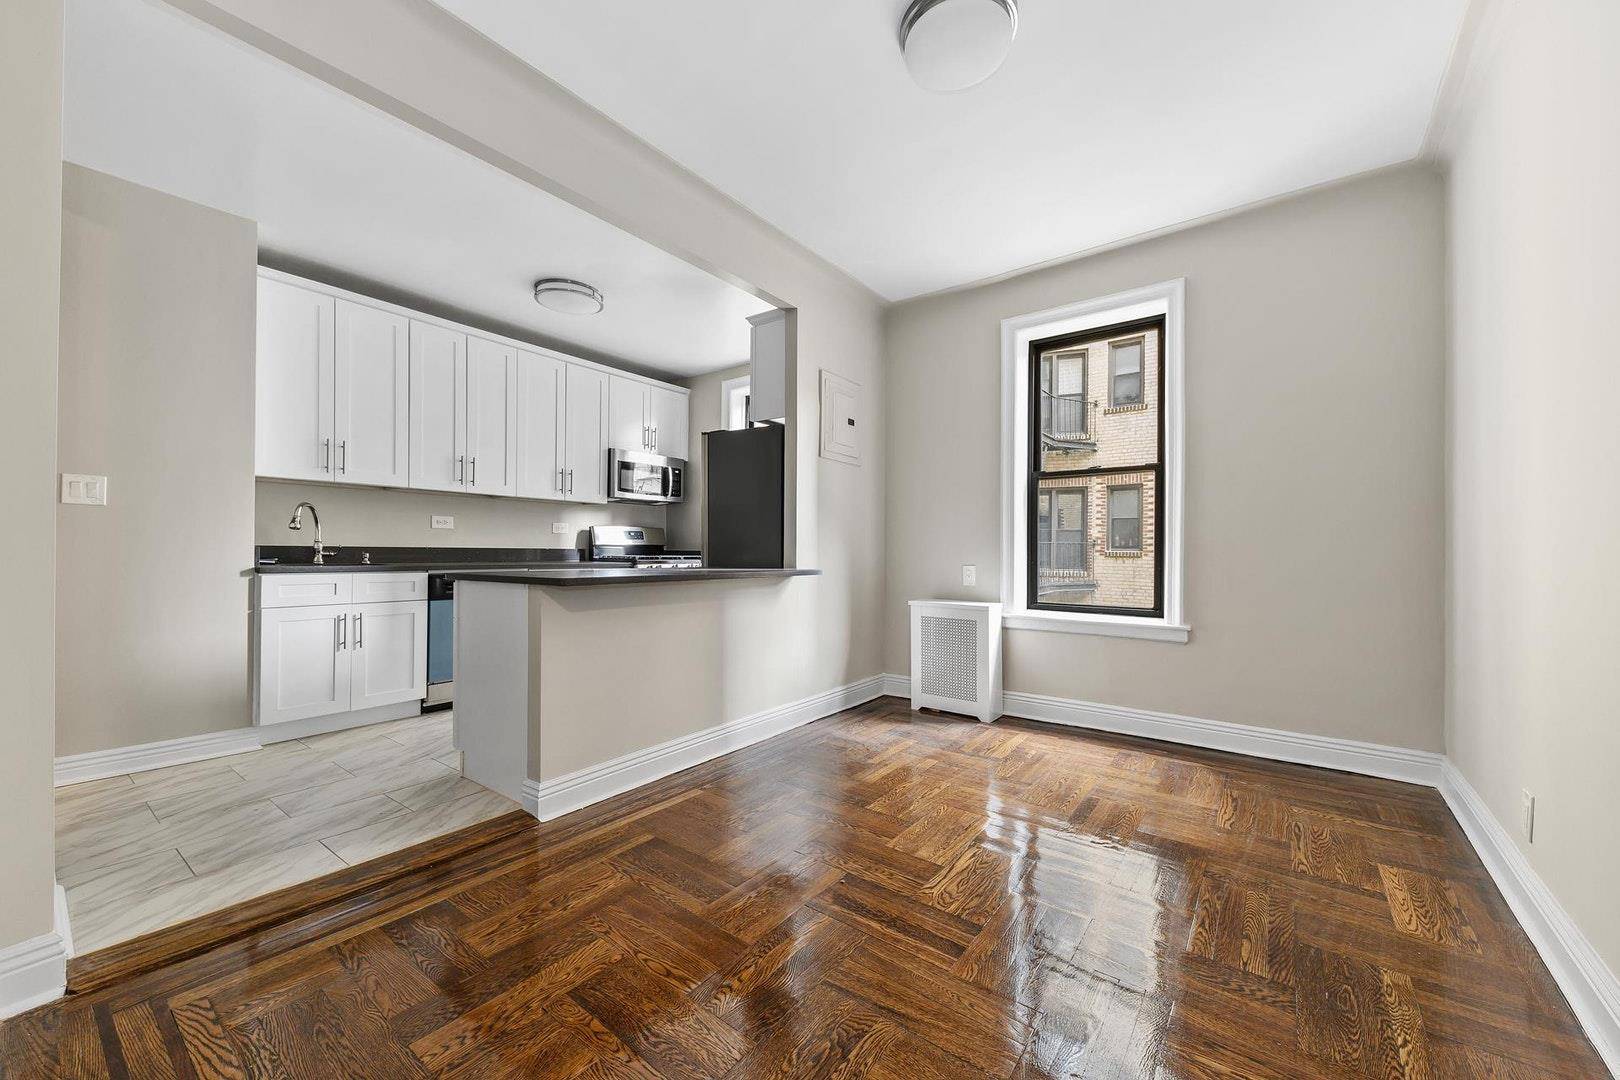 Located on quite tree lined street in Prospect Lefferts Garden, this 3 bedroom 1 bath coop is in excellent move in condition.